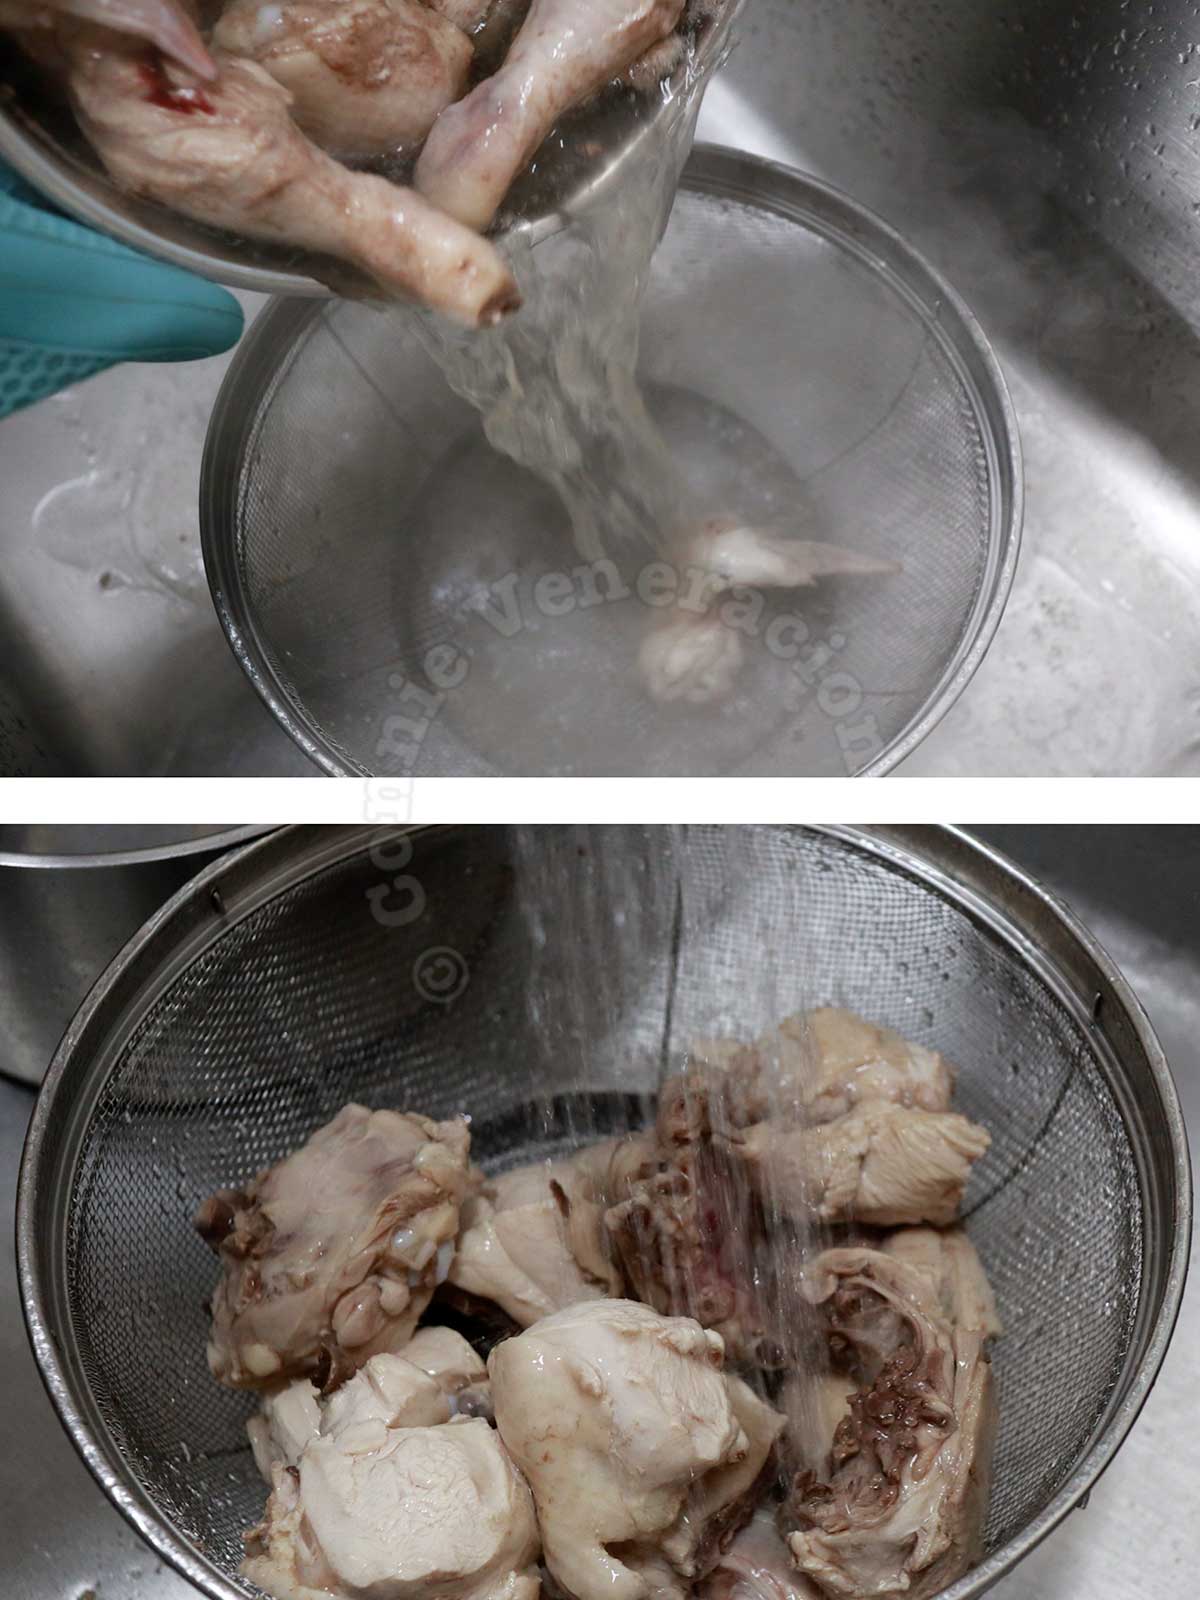 Draining and rinsing parboiled chicken to remove impurities